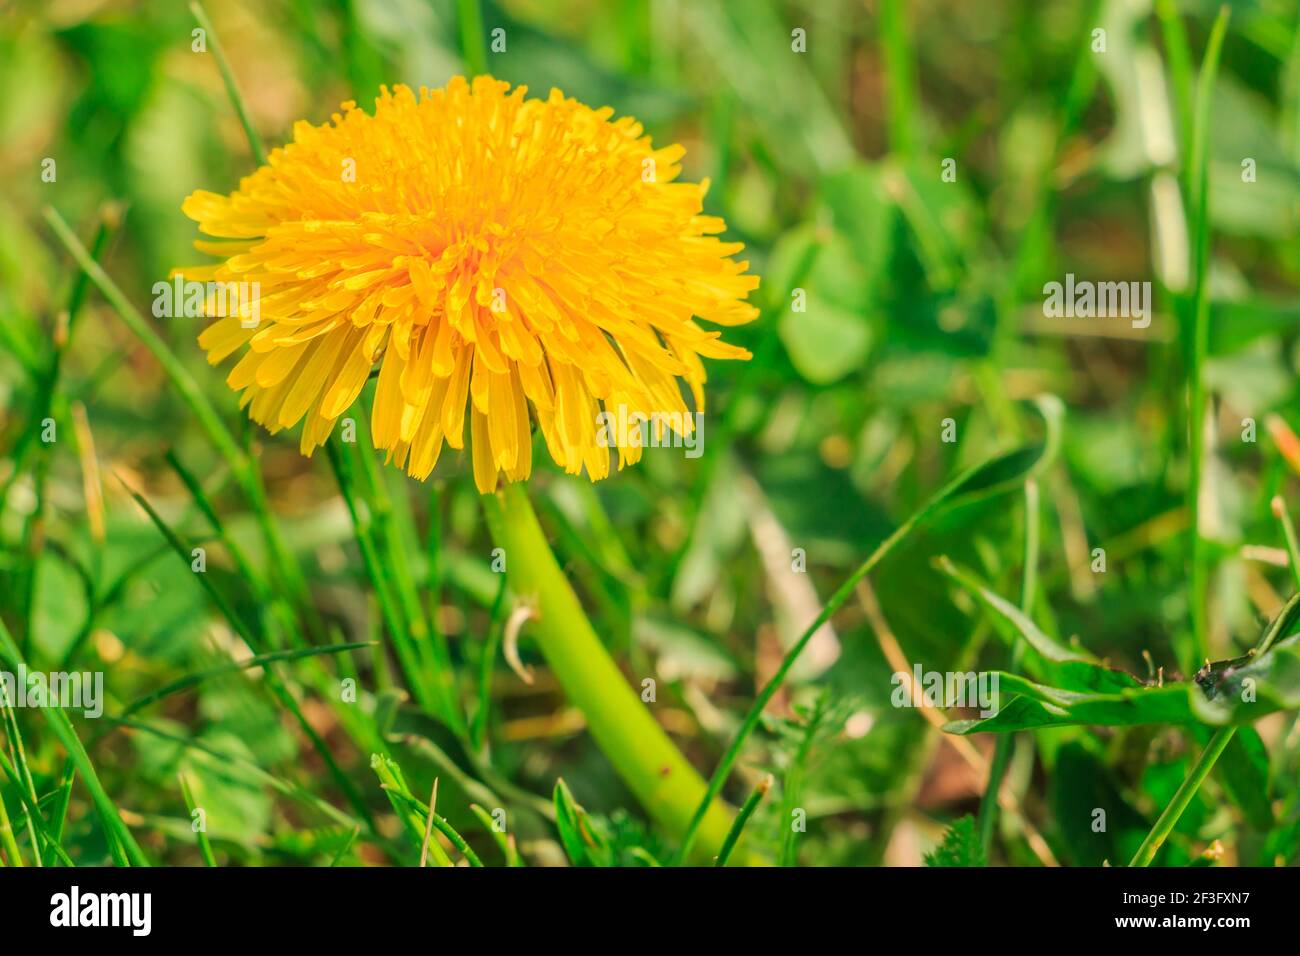 single flower of the common dandelion (Taraxacum) from the sunflower family (Asteraceae). Yellow petals with flower stems. View through grass meadow Stock Photo